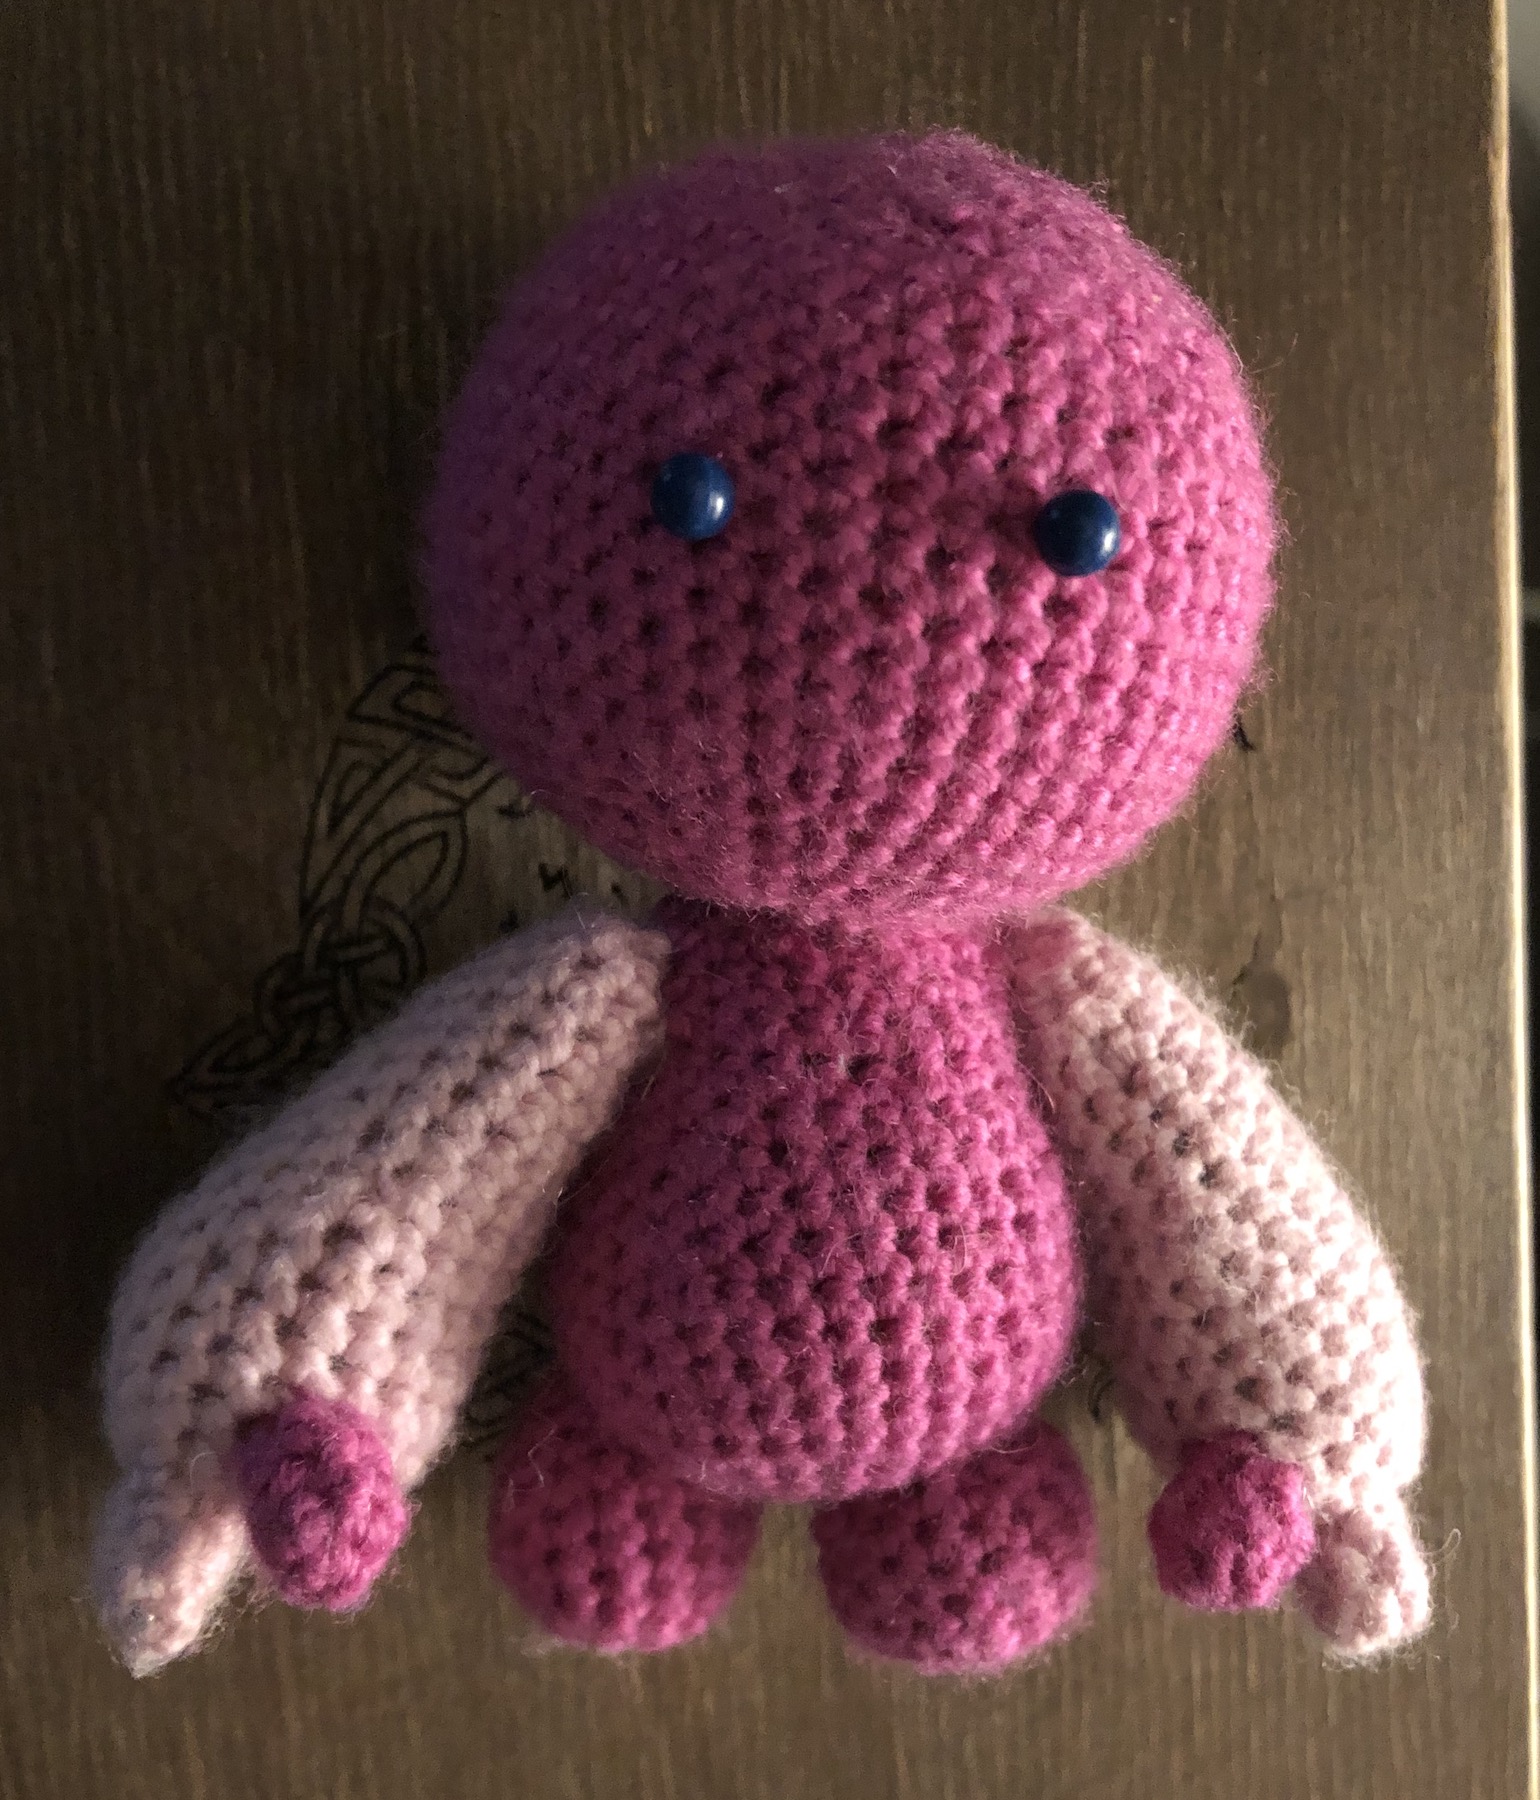 Crocheted head and body now with legs, arms, and fingers. Still pins for eyes